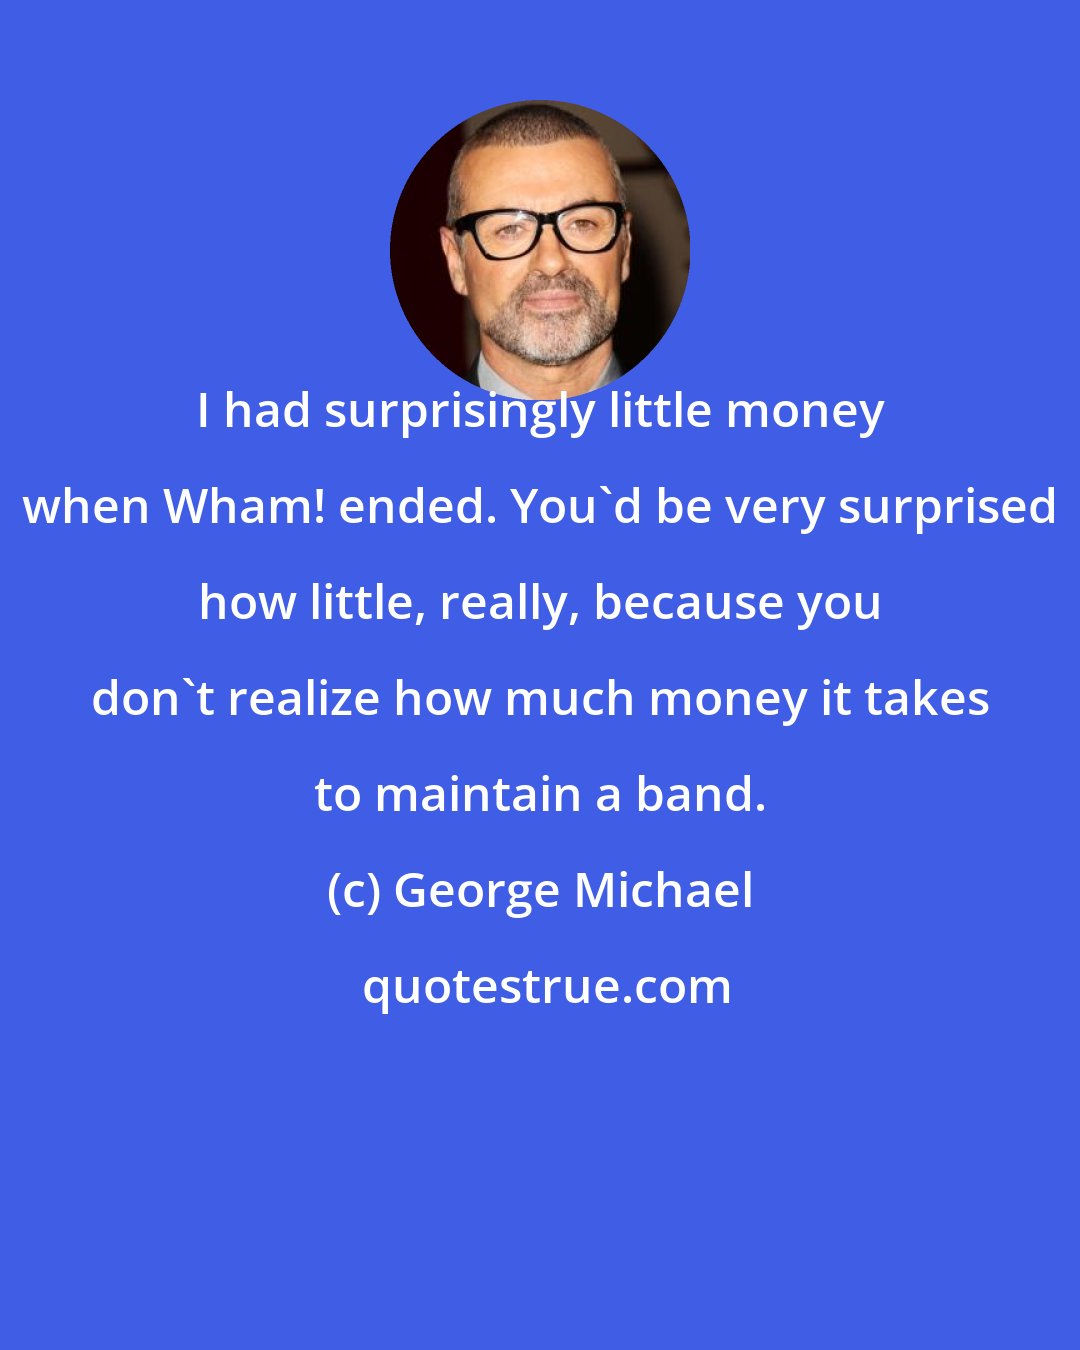 George Michael: I had surprisingly little money when Wham! ended. You'd be very surprised how little, really, because you don't realize how much money it takes to maintain a band.